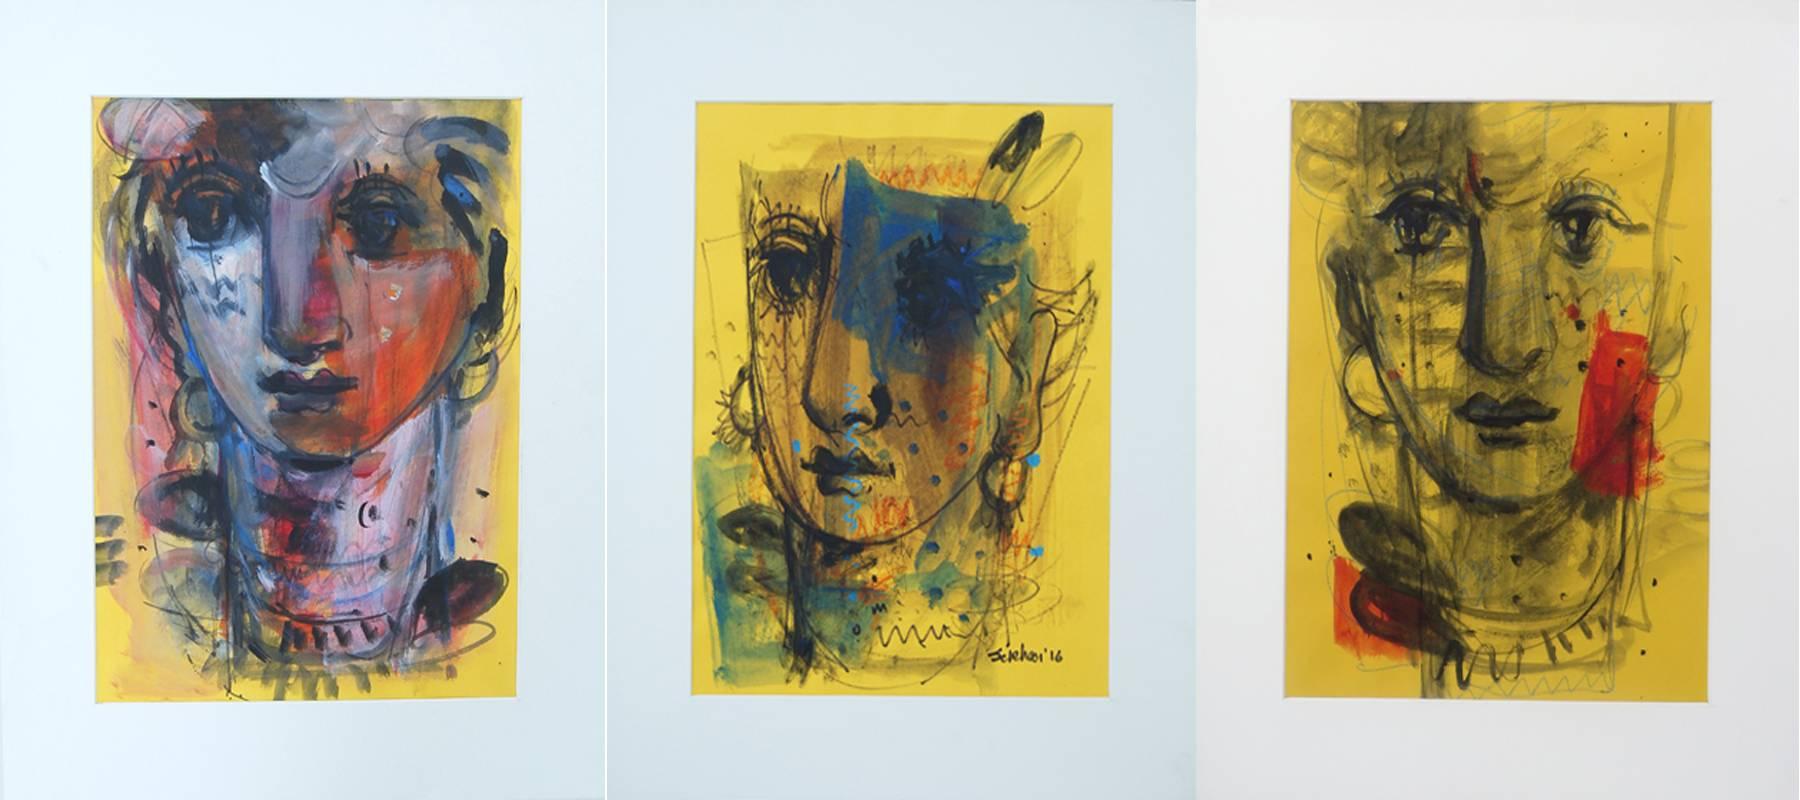 Sekhar Kar Figurative Painting - Woman Faces, Mixed Media, Blue, Brown, Red, Yellow by Indian Artist "In Stock"